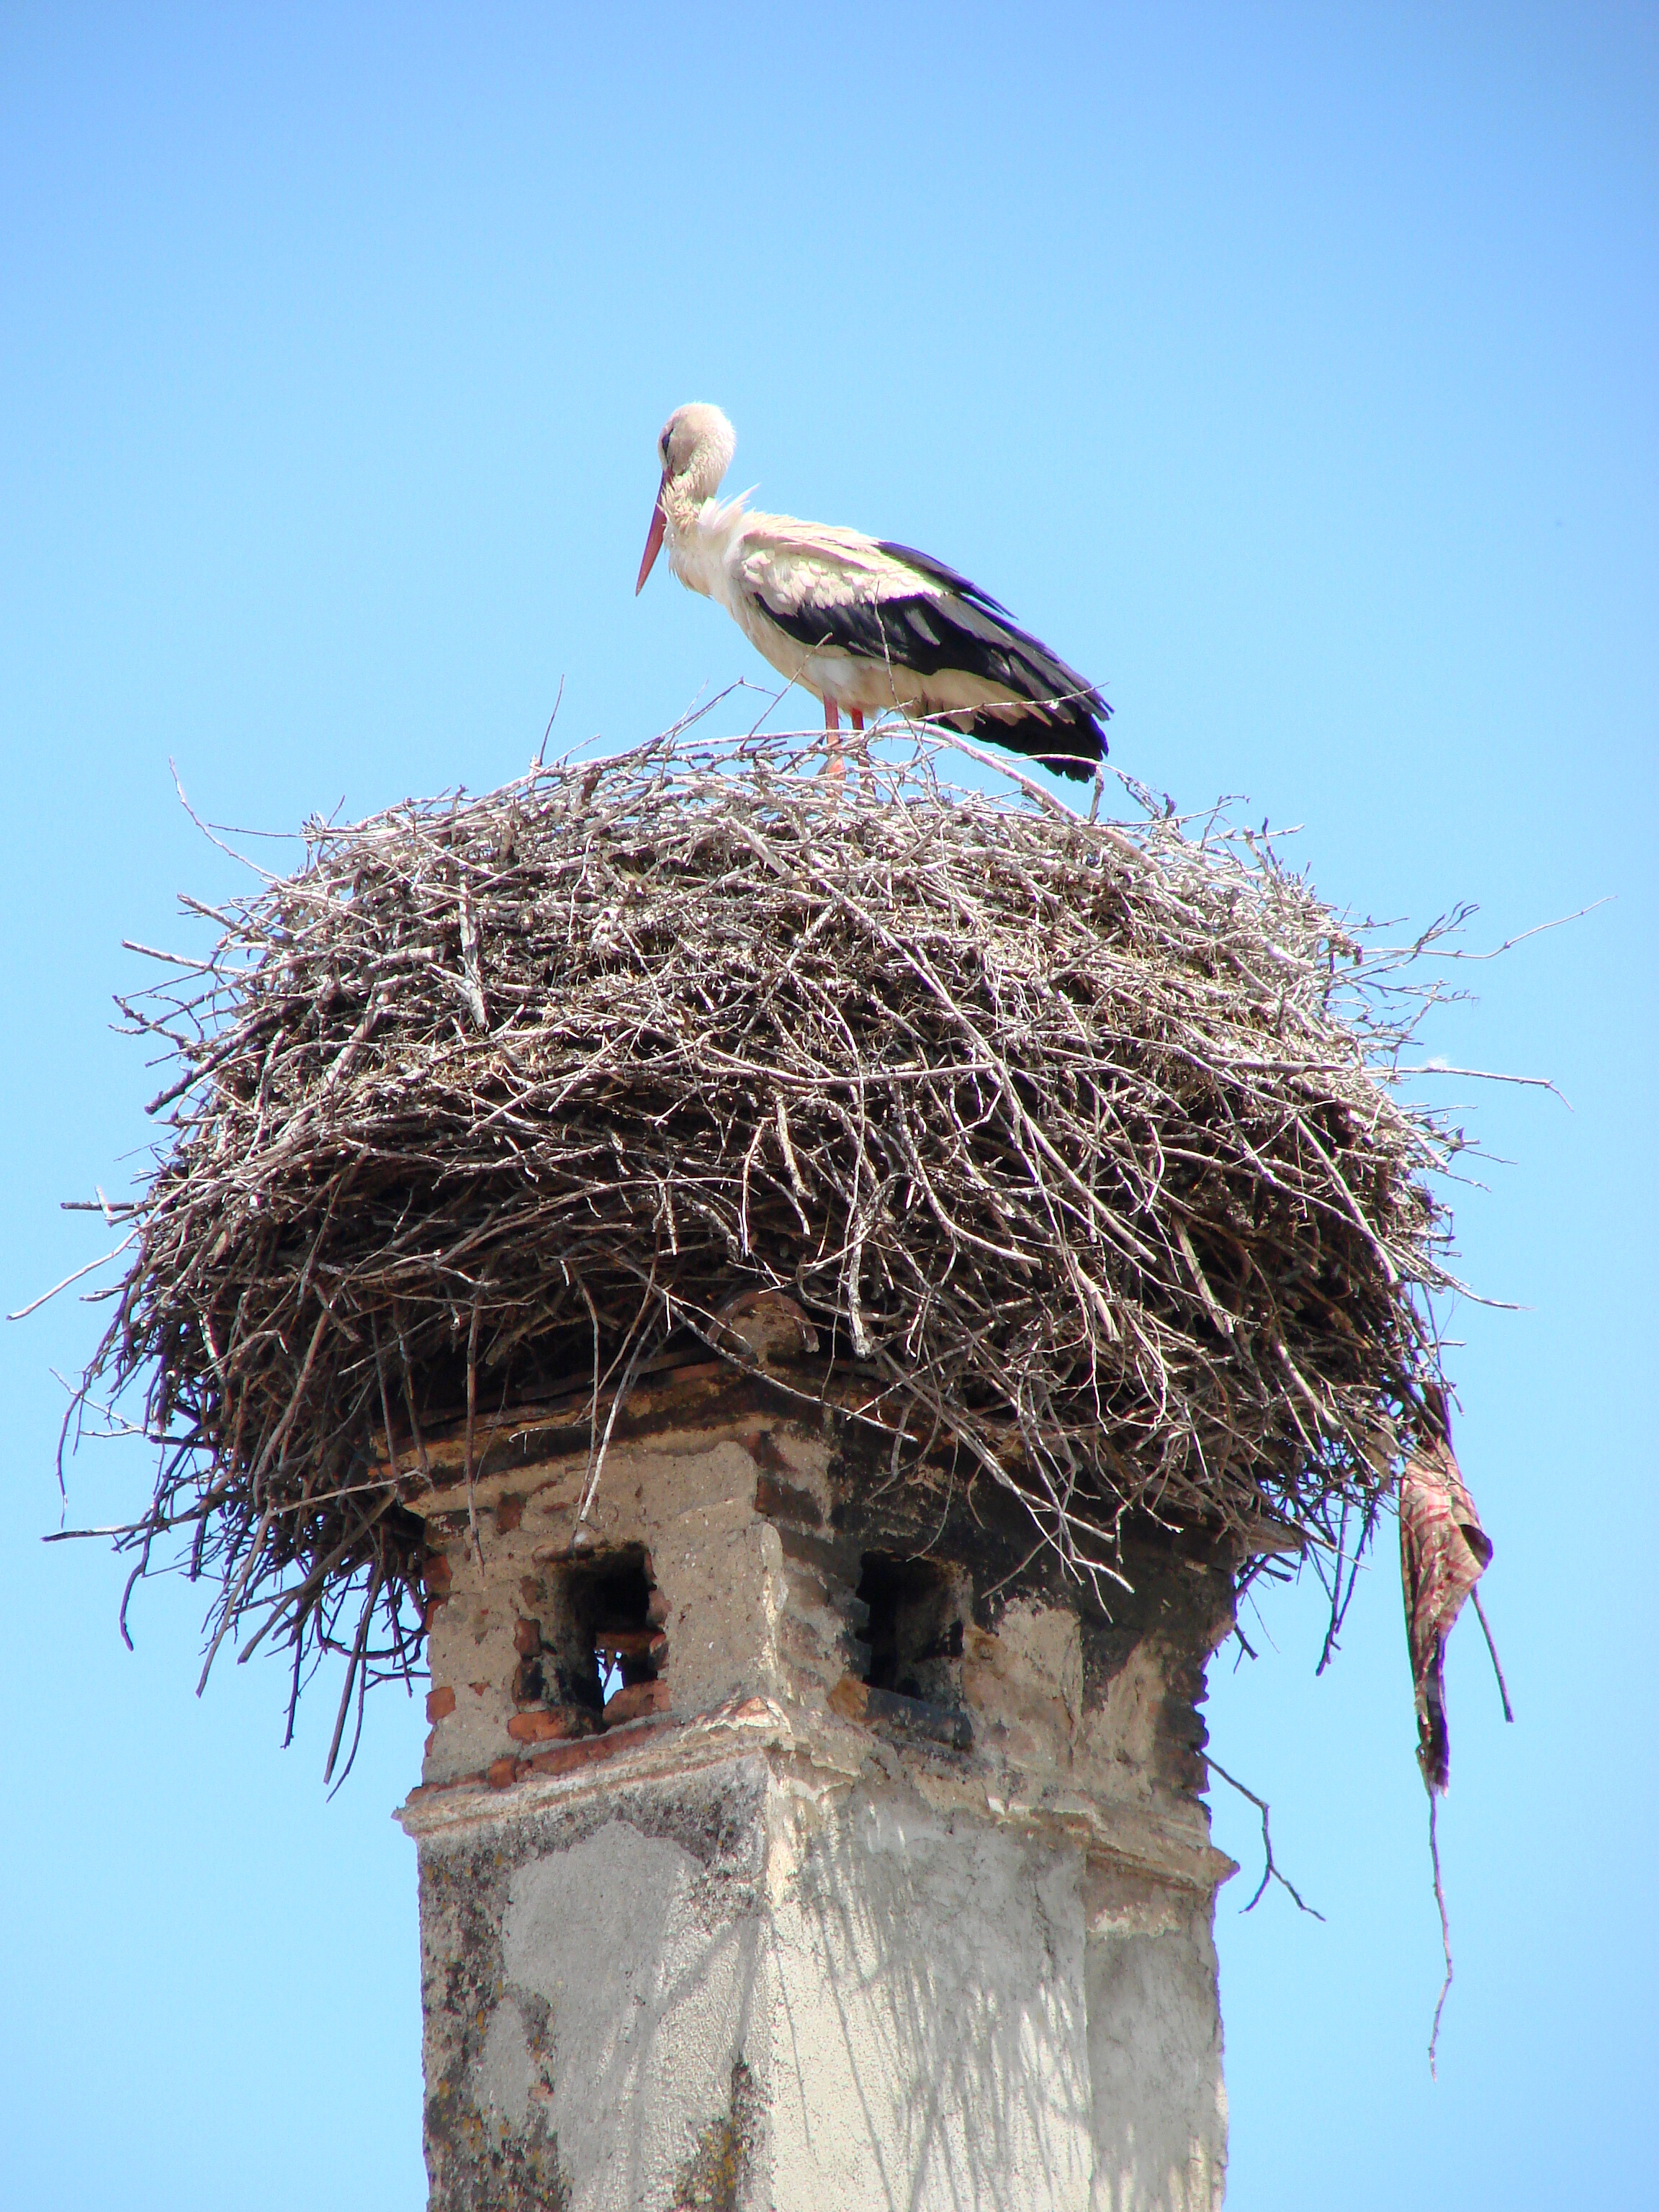 File:A Stork Nests in an Ancient Chimney - Harman - Romania.jpg ...